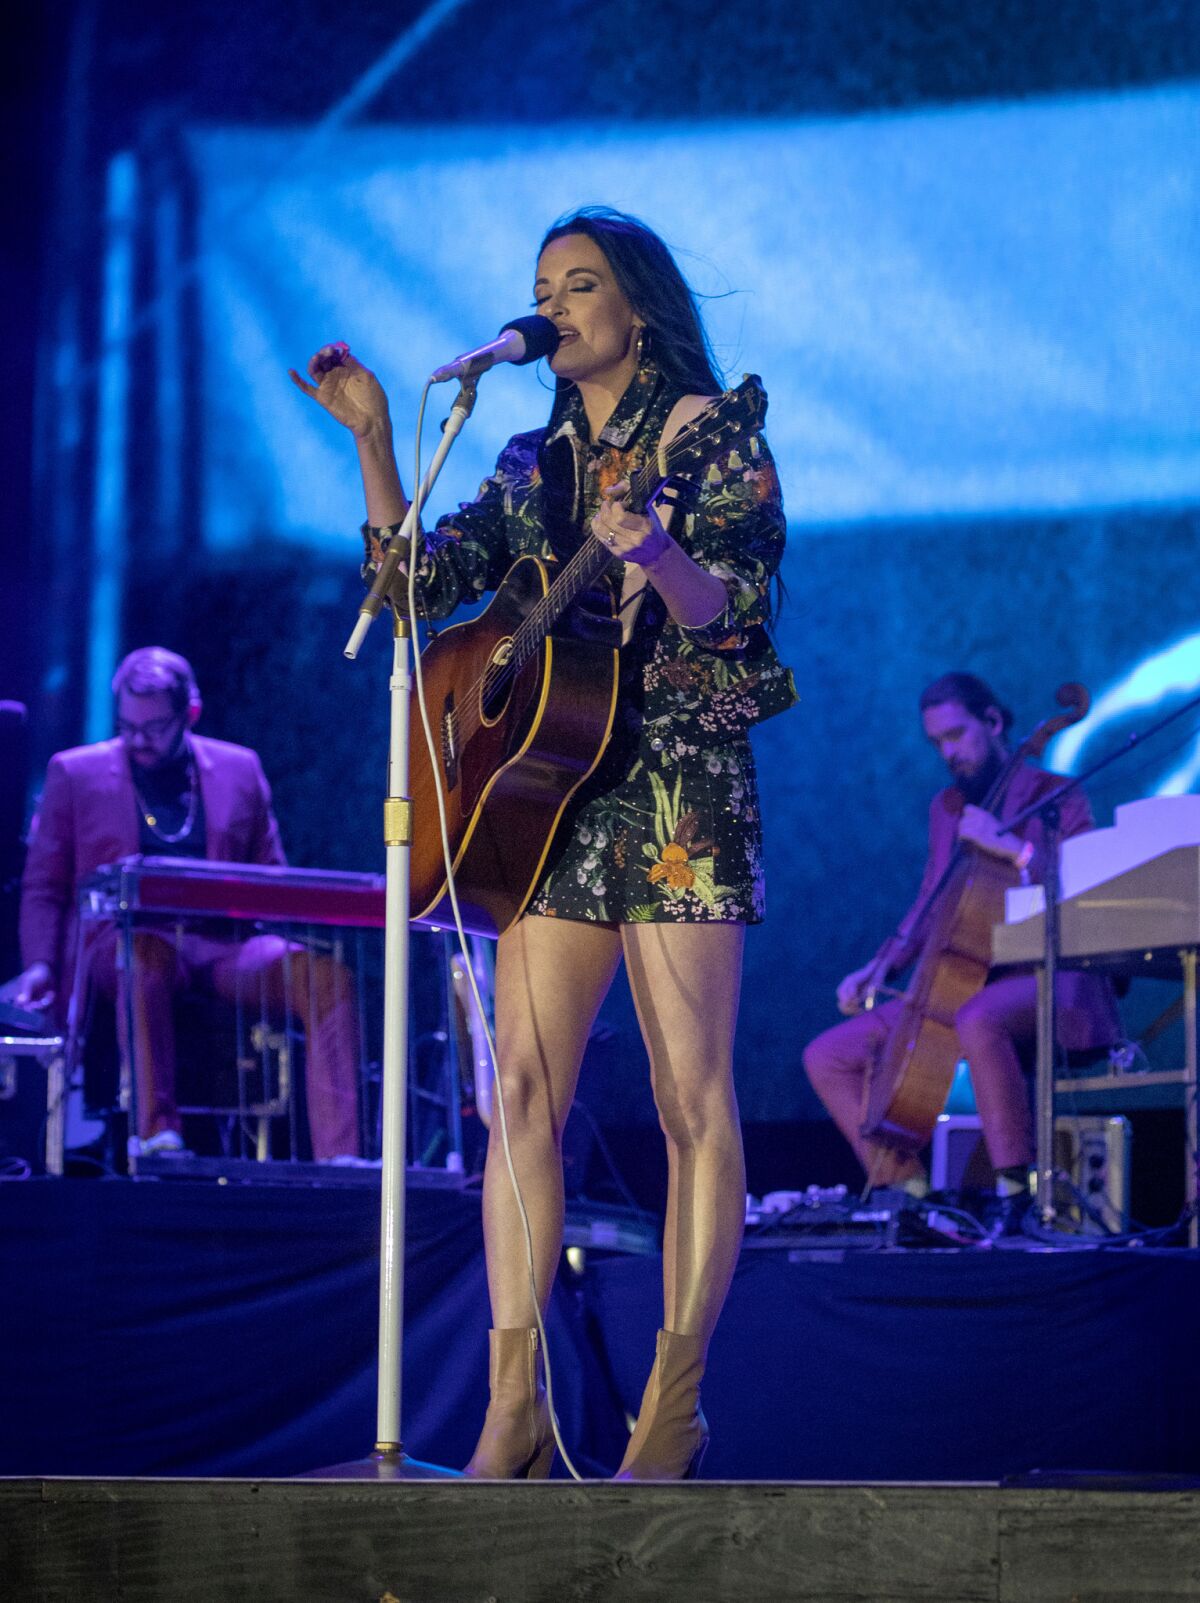 Kacey Musgraves performs in April at the Stagecoach country music festival in Indio.